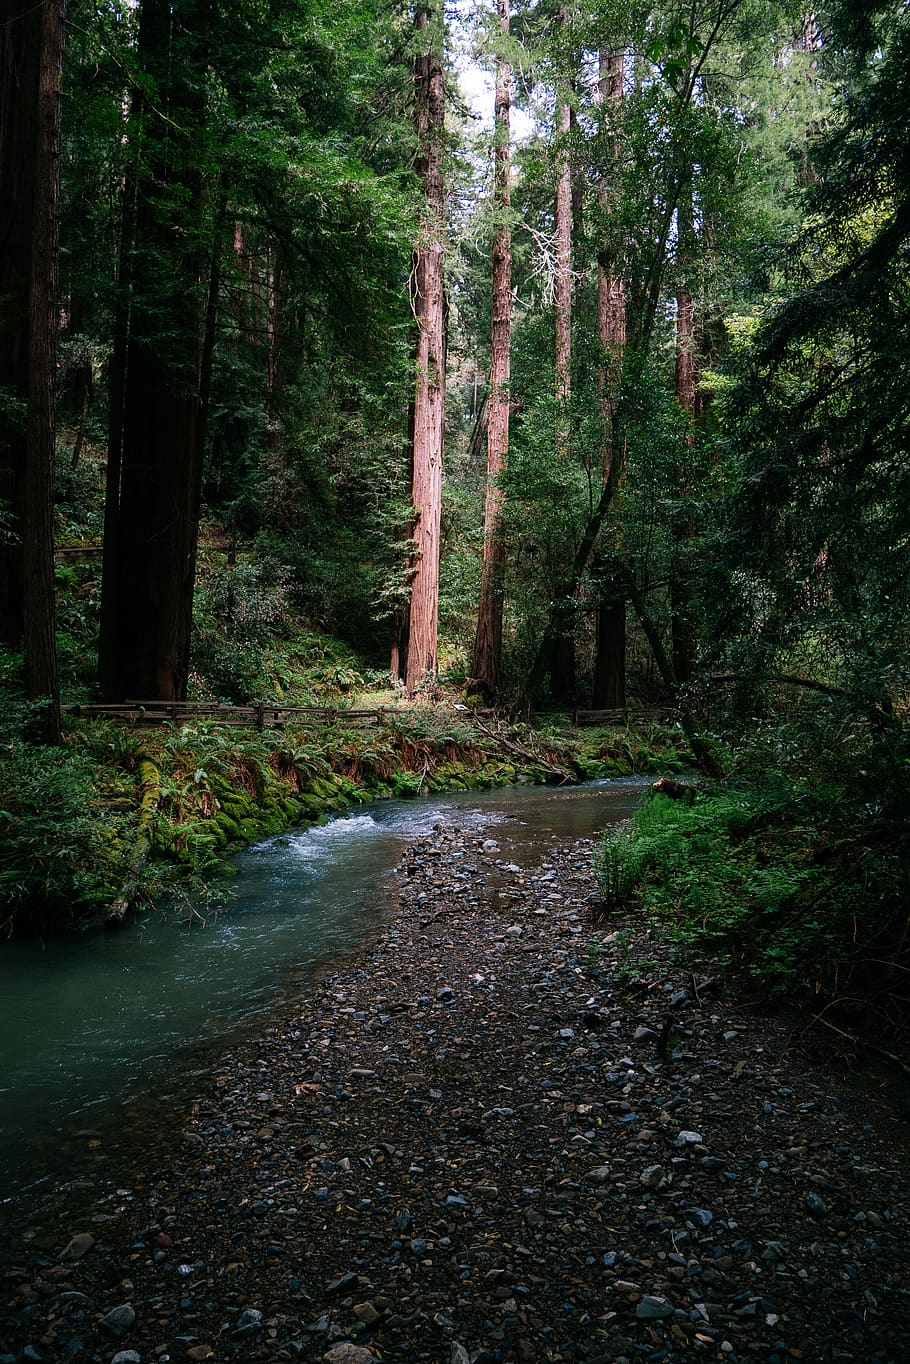 united states, mill valley, muir woods national monument, redwoods